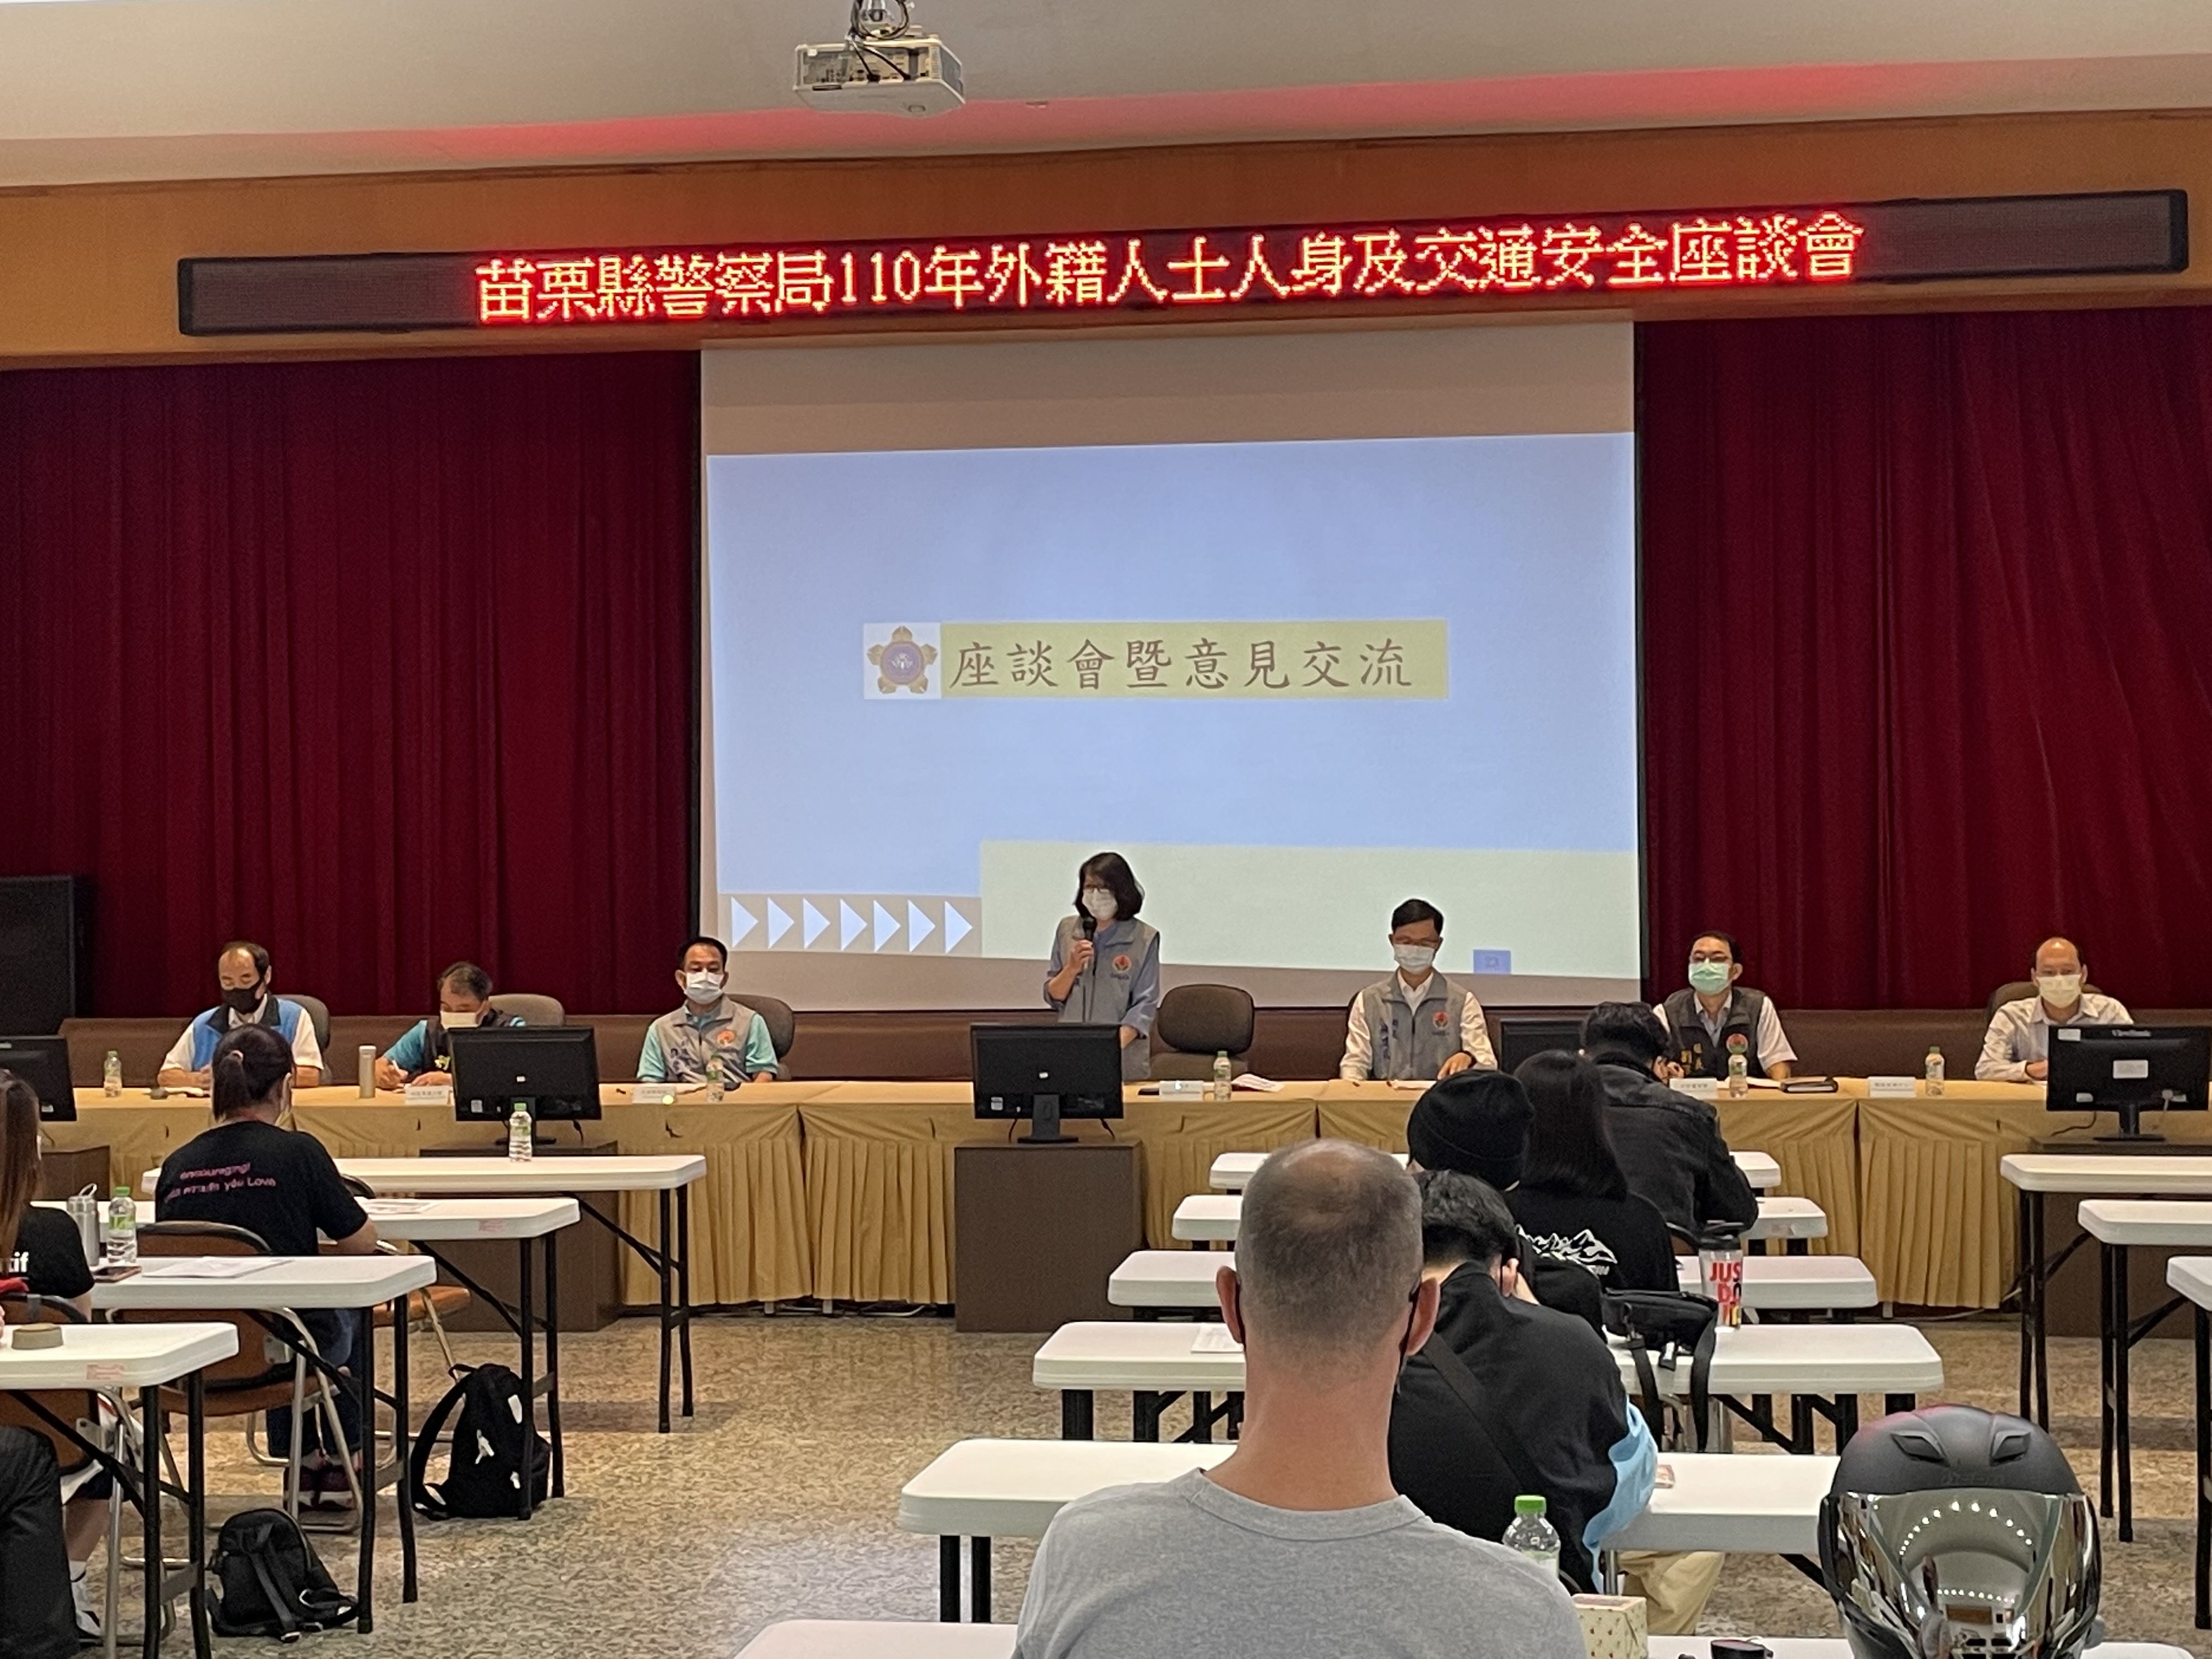 The Miaoli Police Station uses an action drama to promote the traffic safety rules to new immigrants. (Photo / Provided by the Miaoli County Government)